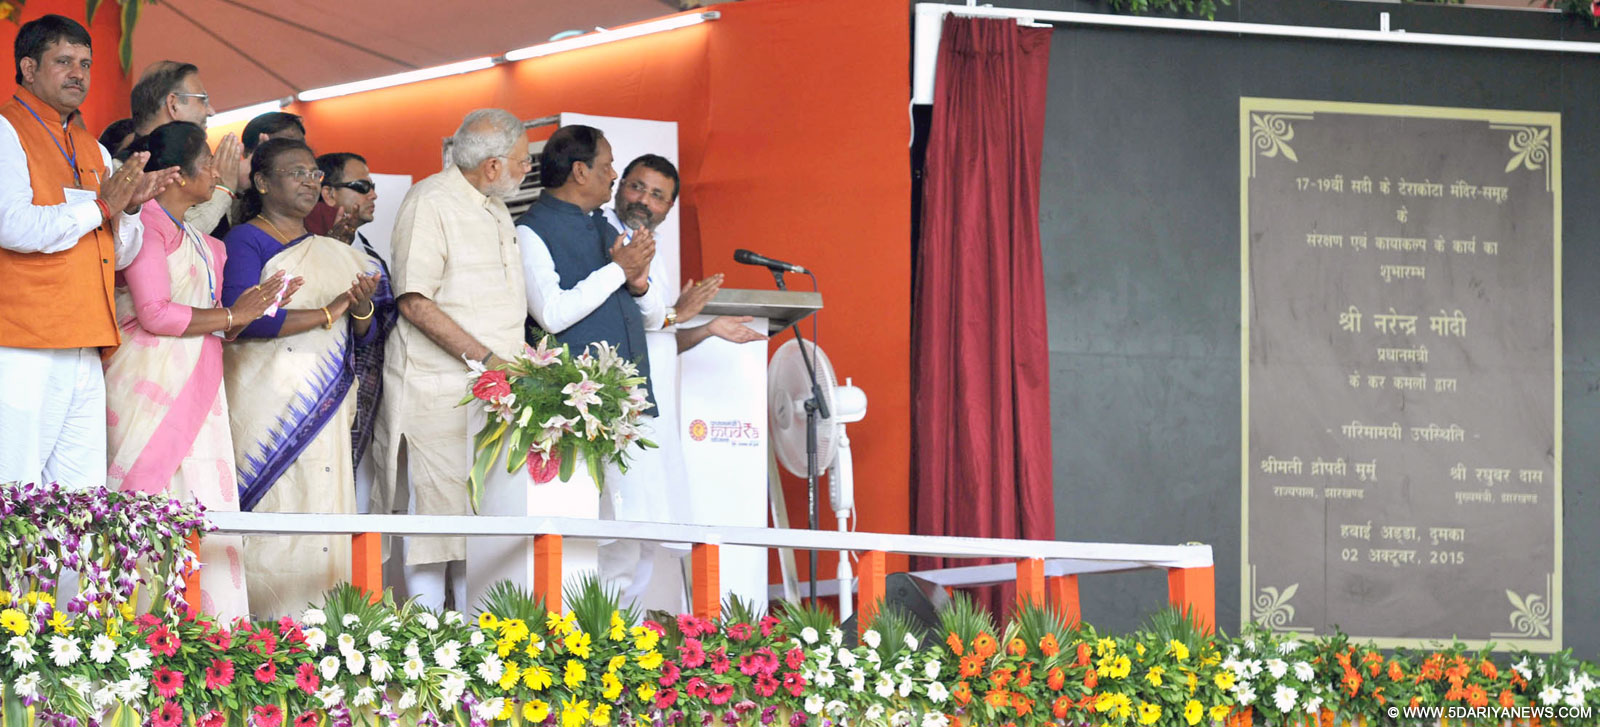 The Prime Minister, Shri Narendra launching a project for the conservation & development of 17-19 century Terracotta Maluti temple complex, in Dumka, Jharkhand on October 02, 2015. The Governor of Jharkhand, Smt. Draupadi Murmu, the Chief Minister of Jharkhand, Shri Raghubar Das, the Minister of State for Finance, Shri Jayant Sinha and other dignitaries are also seen.